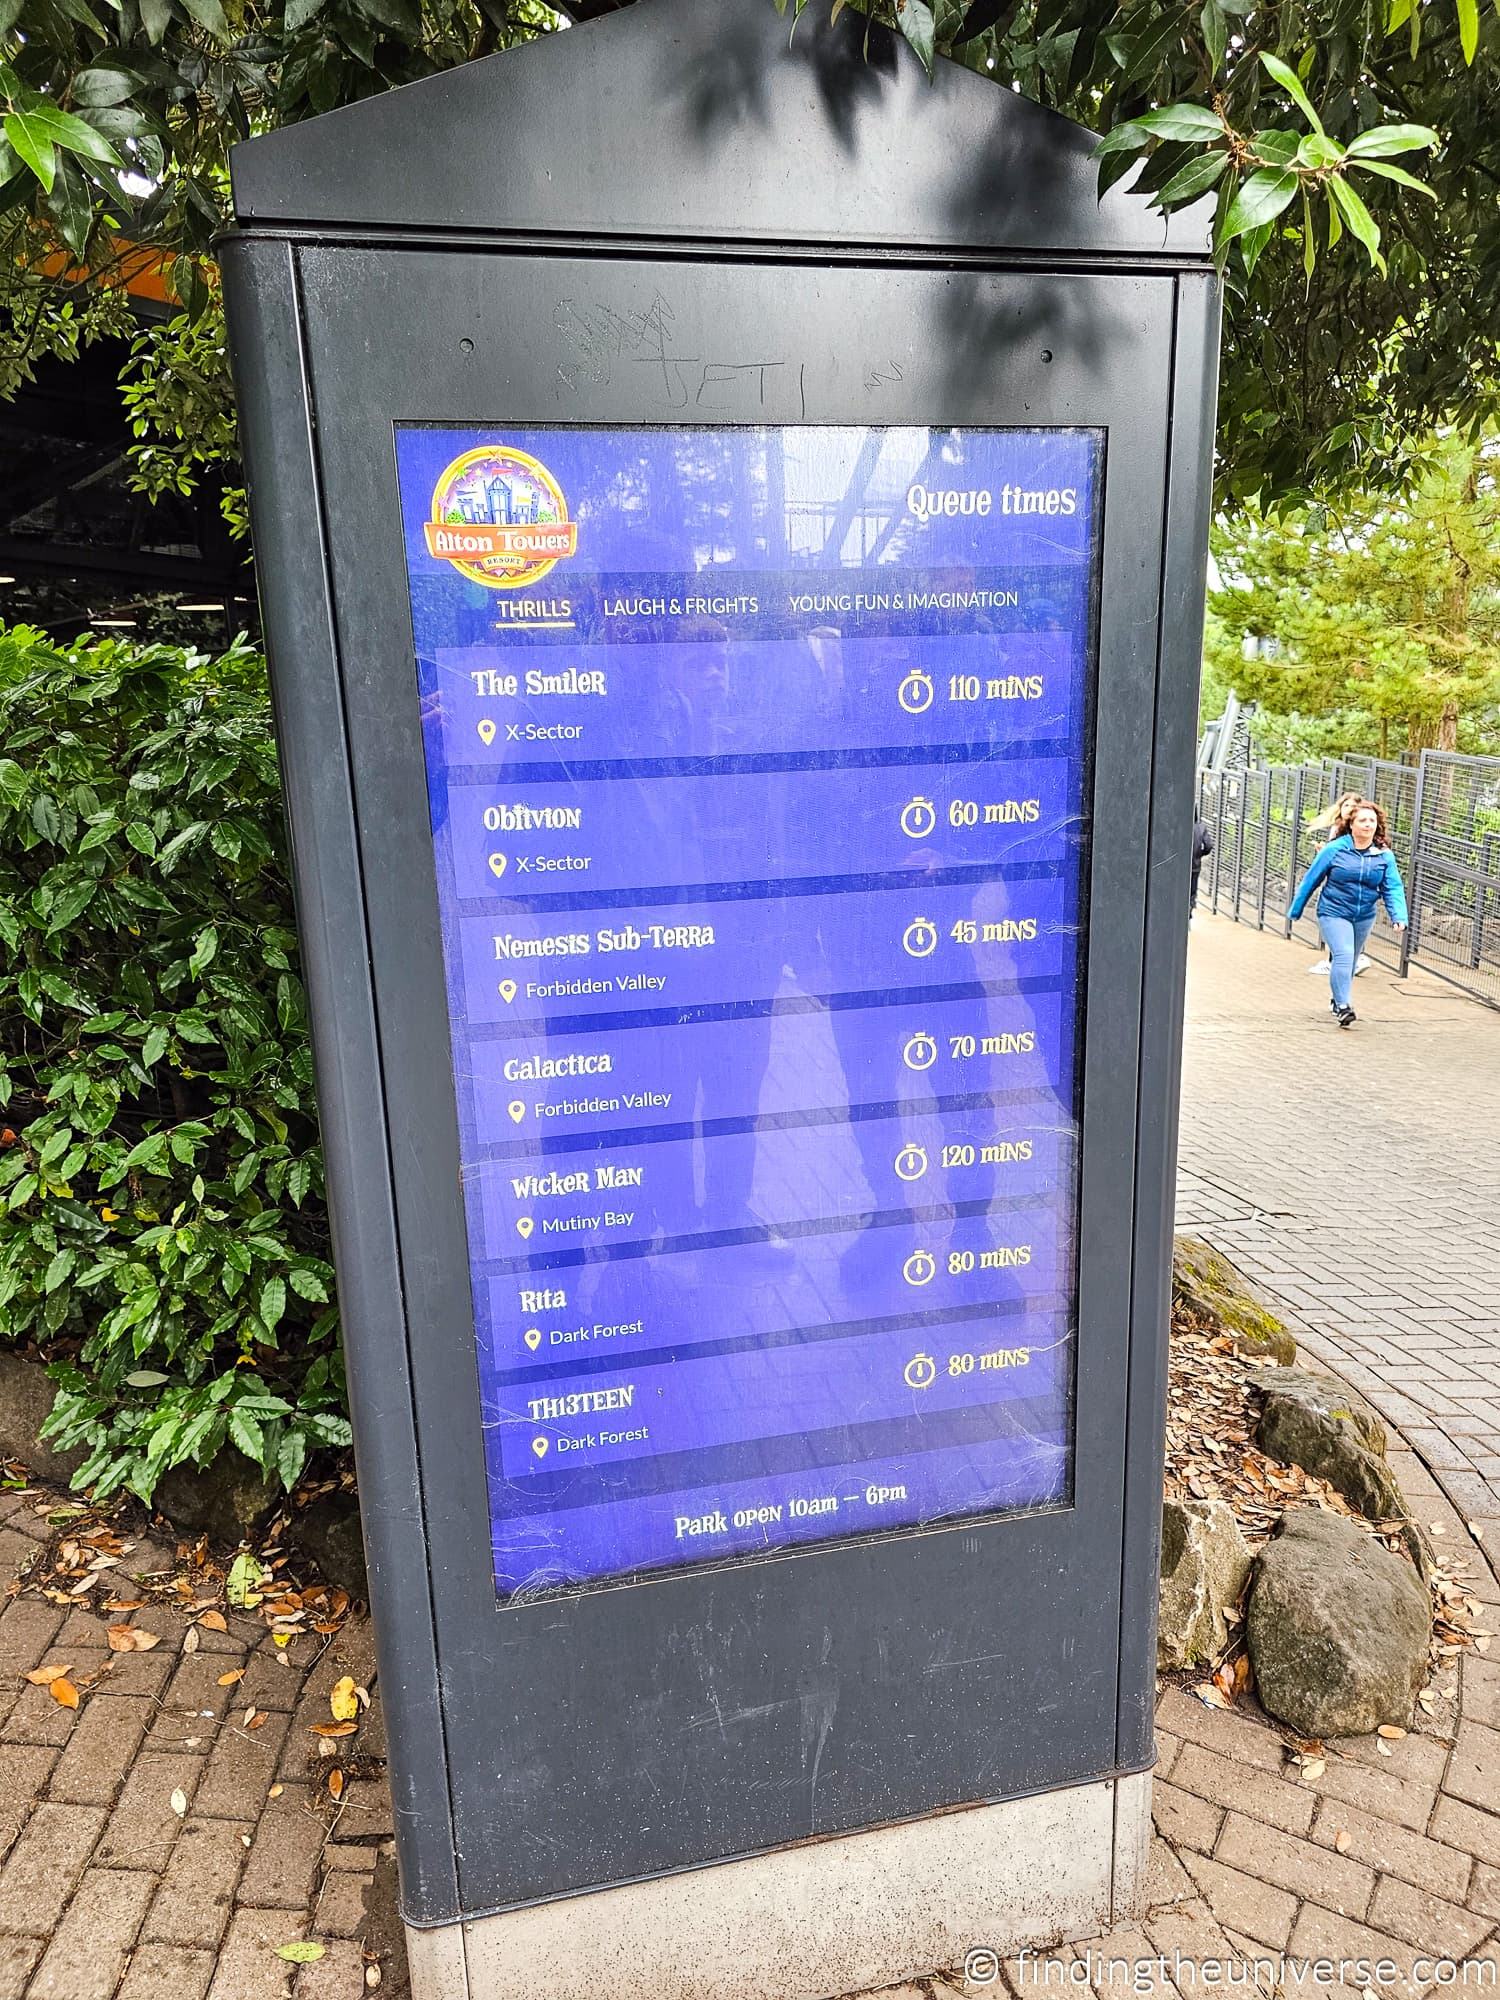 Queue time board at Alton Towers